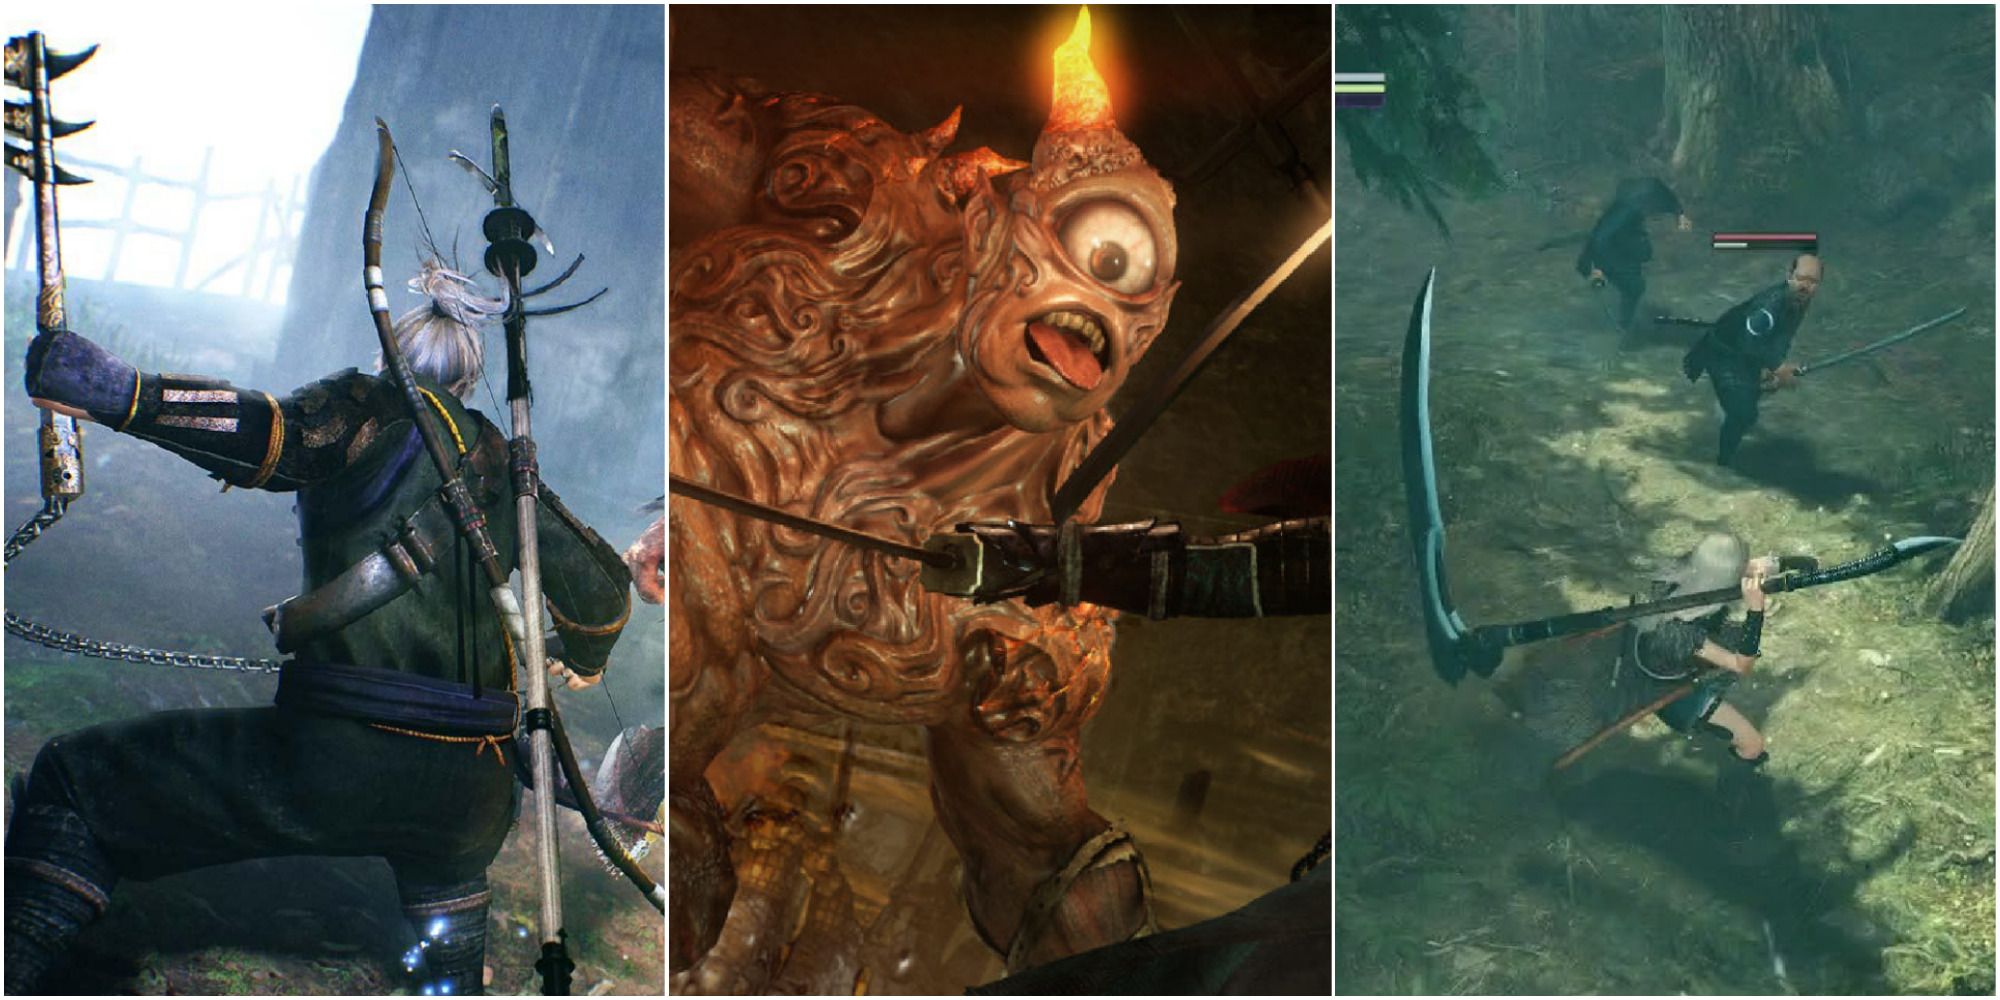 a collage of images from Nioh 2, showing characters using kusarigama and switchglaive weapons, as well as a cyclops enemy